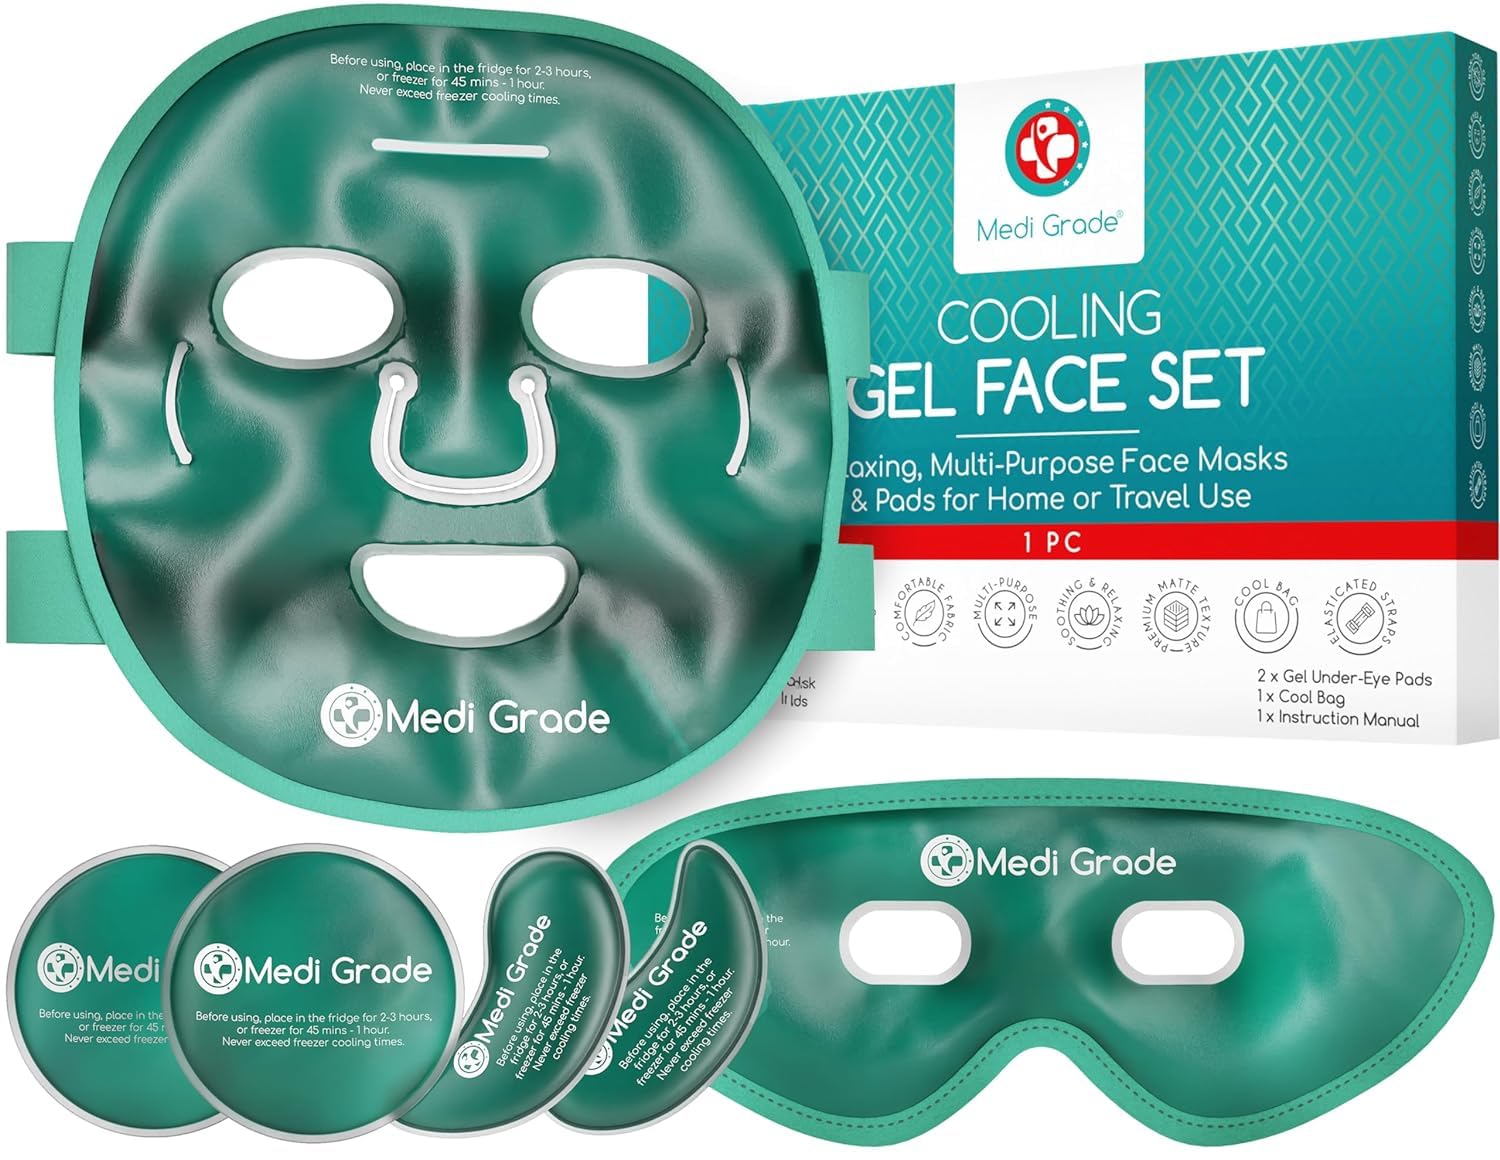 Great package of goodies. I love all the various sizes and shapes I can use. Gets perfectly cold, that case that holds everything is super slim for easy freezer maintenance, which also makes it perfect for not having your mask affected by foods.